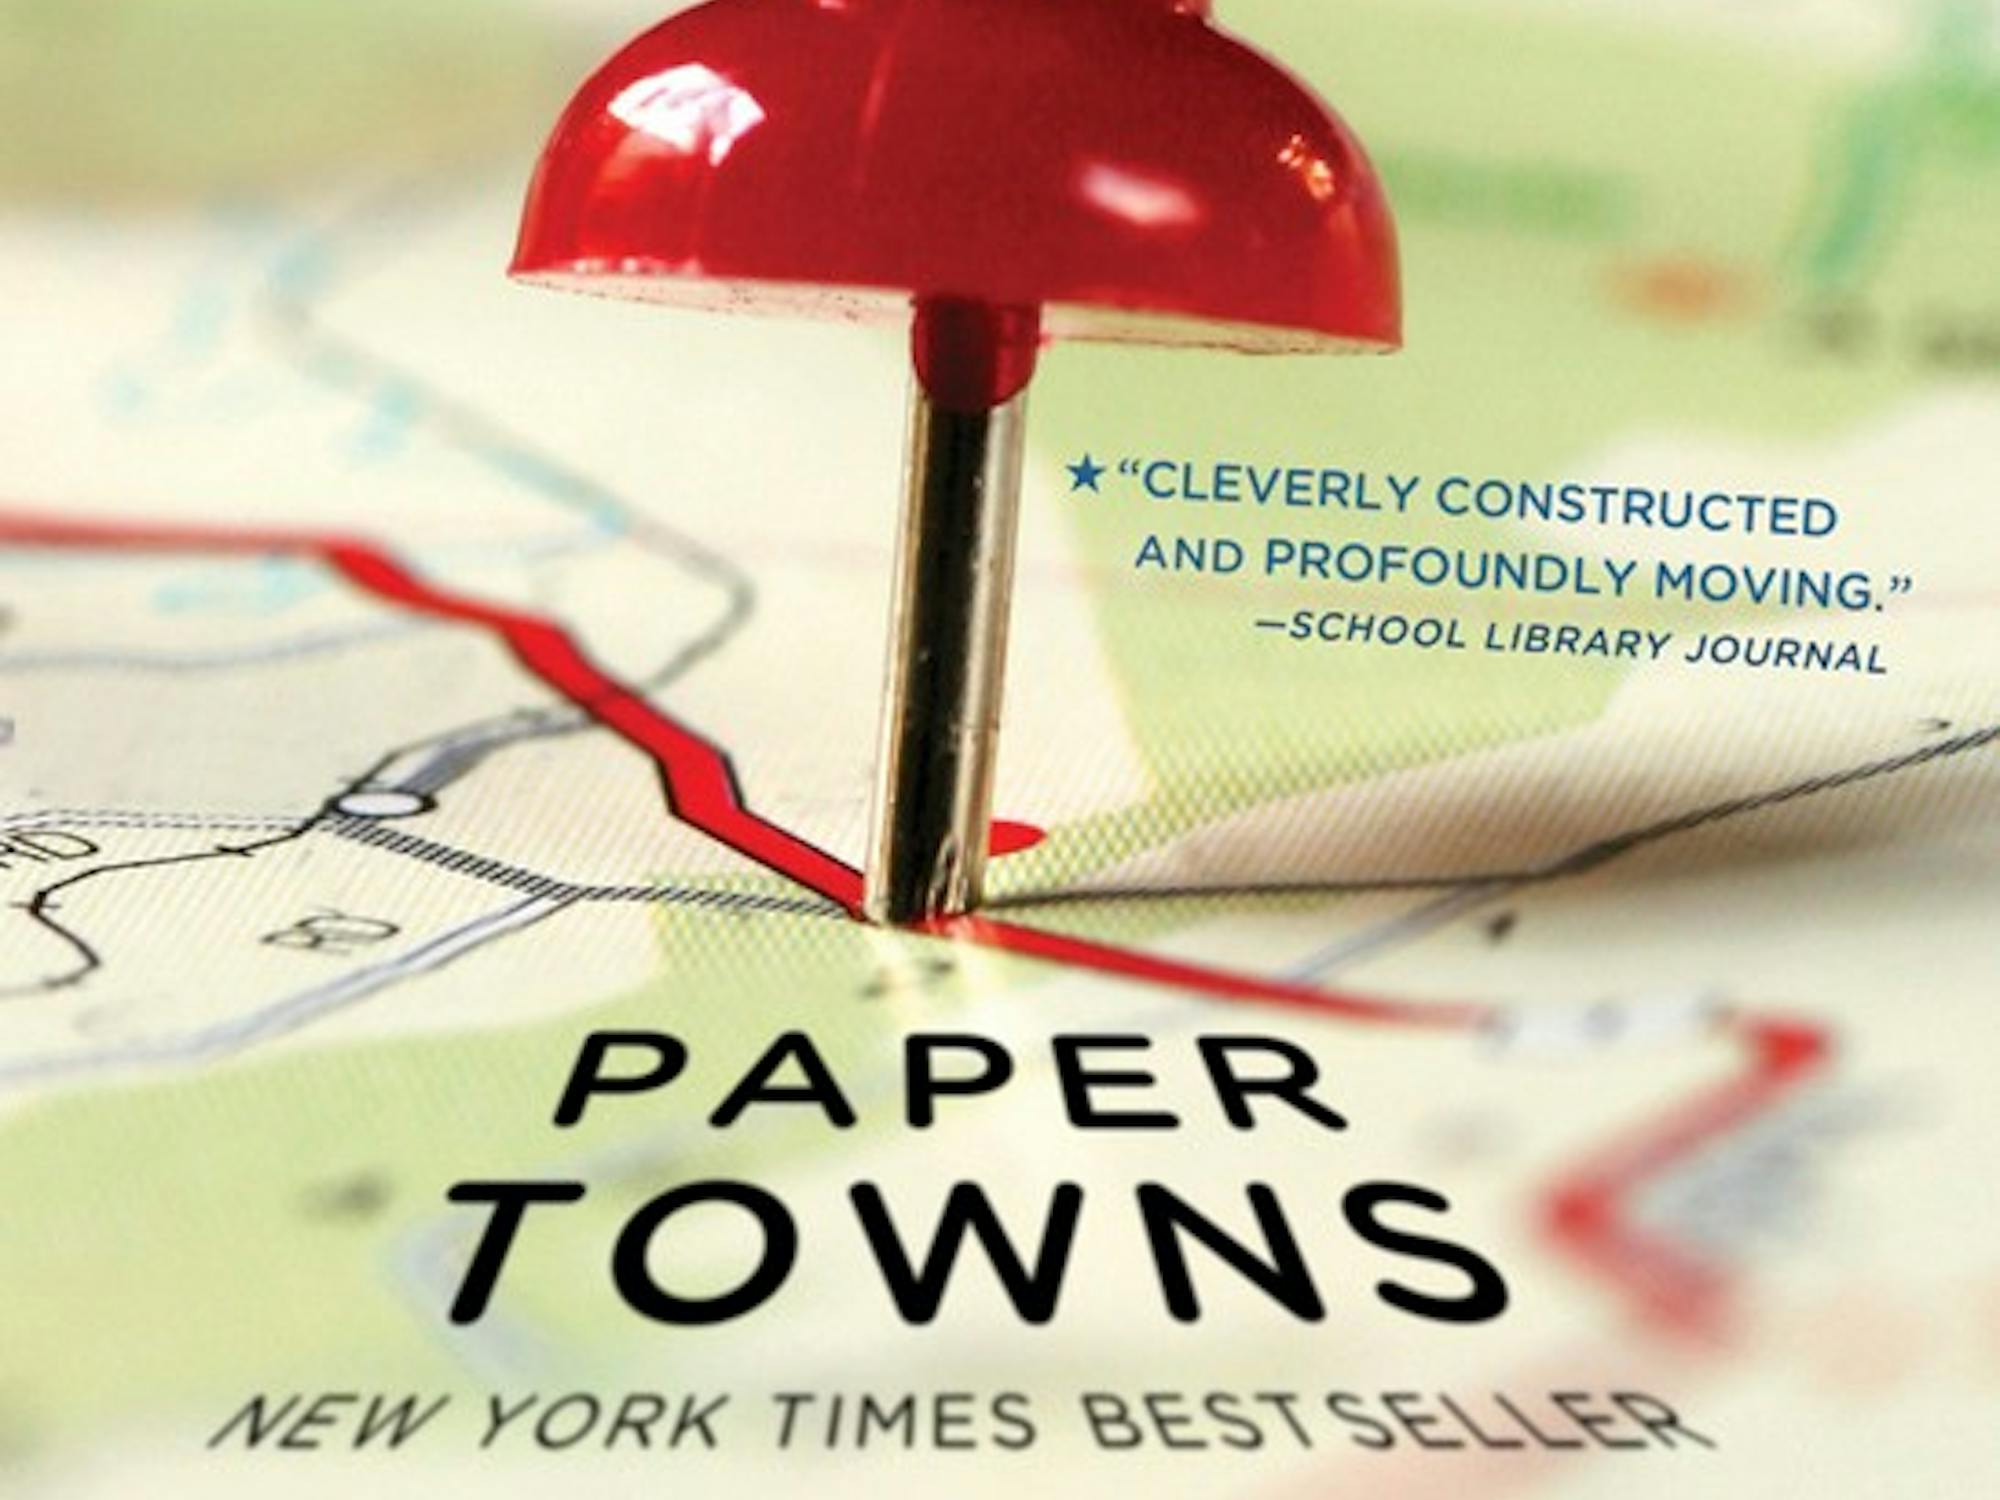 	“Paper towns” is the choice of words to describe the very lifestyle of consumerist people whose every intent in life is based on the conjecture of monetary and social gain. Paper people could be described as people who are living, but not truly alive.